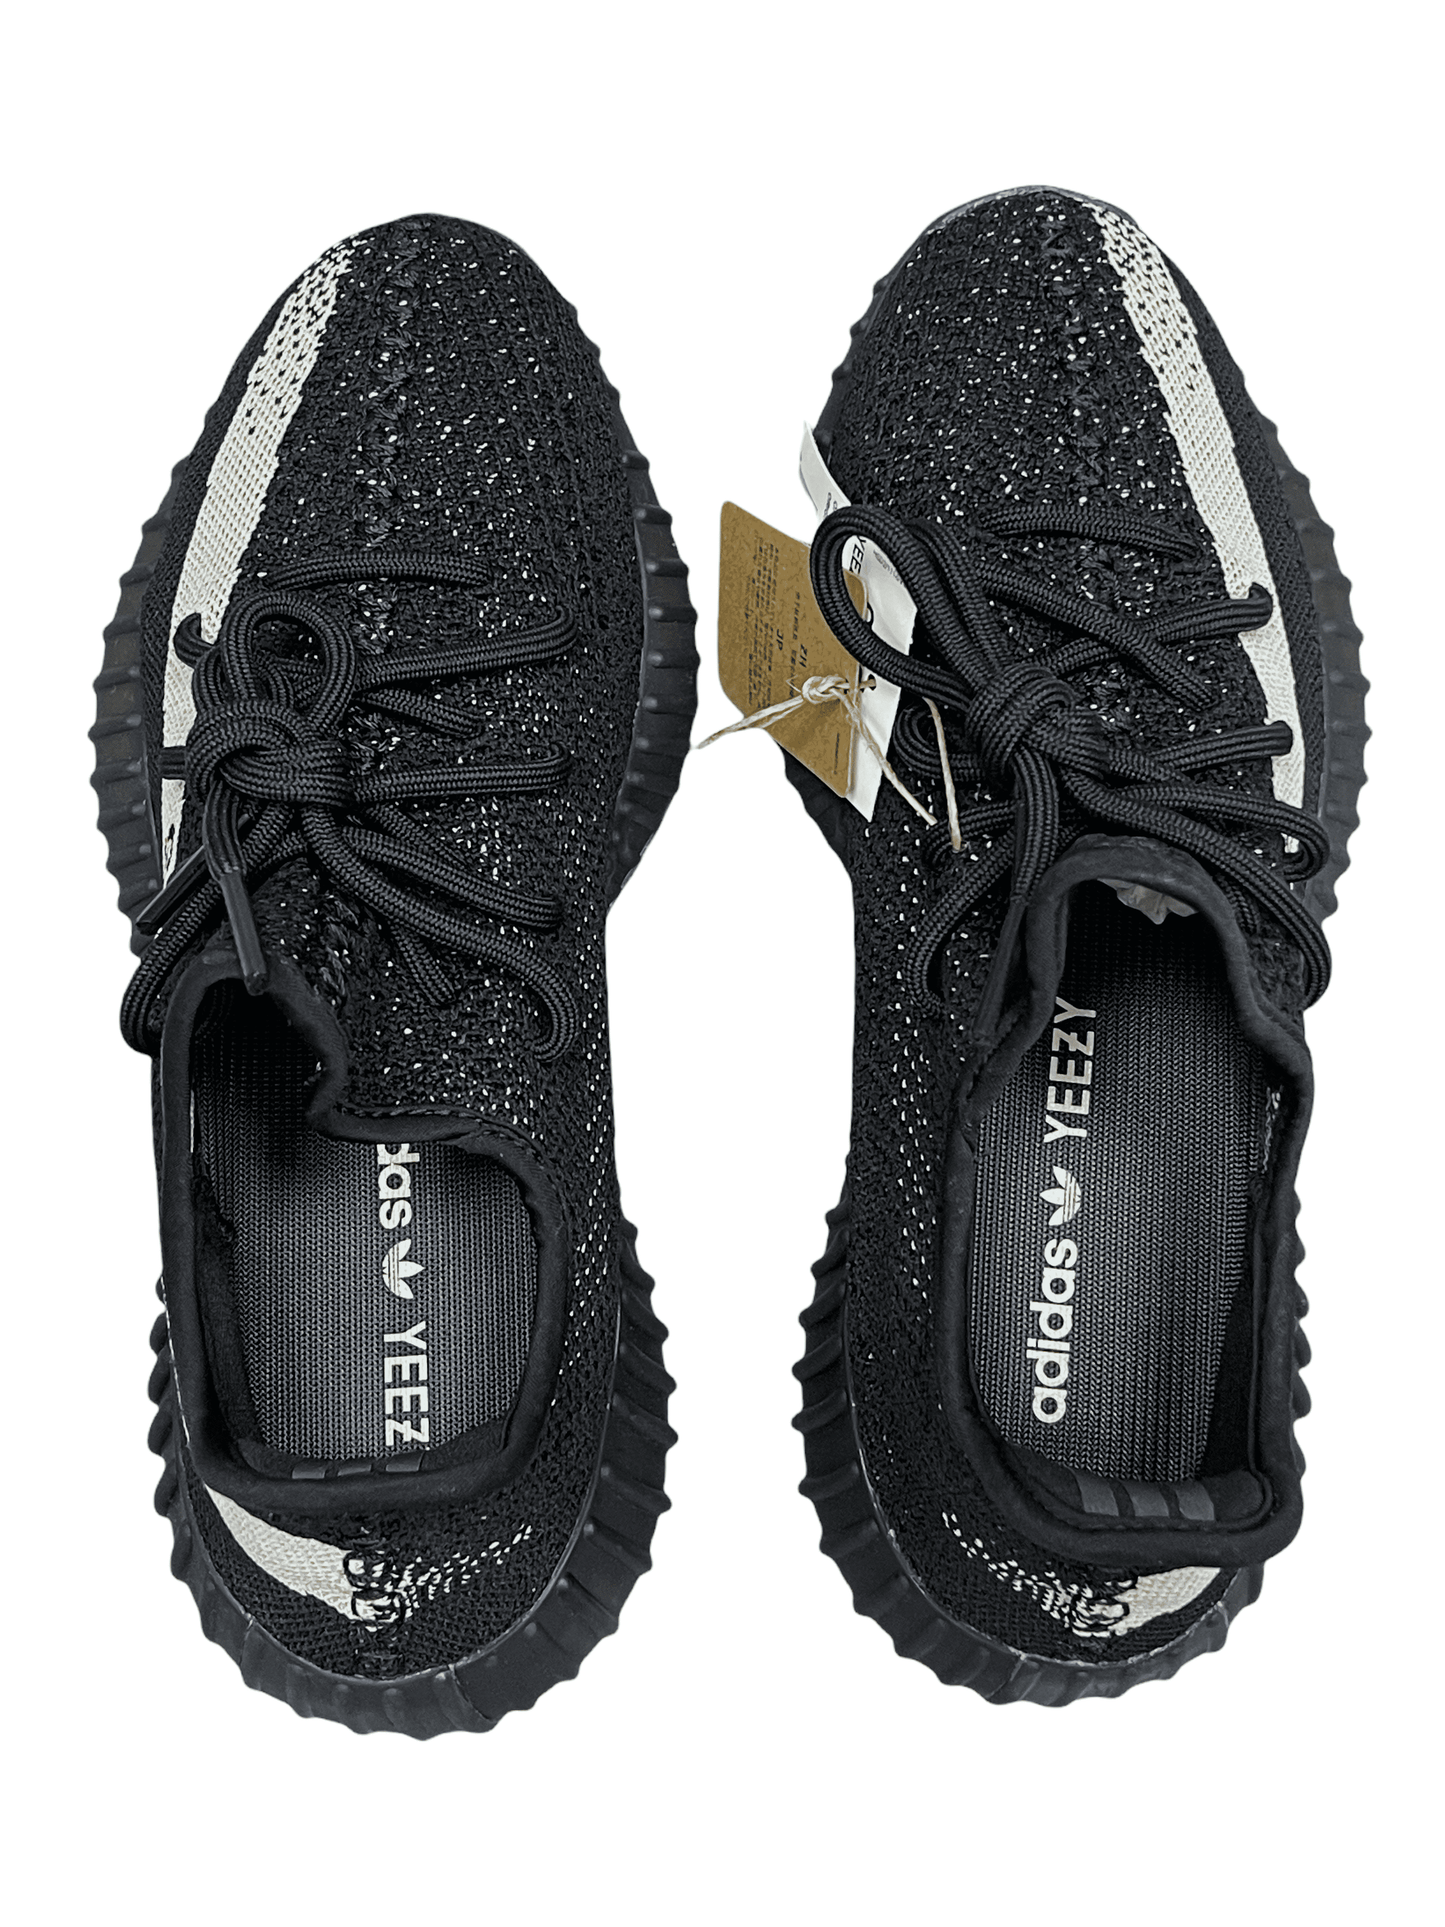 Adidas Yeezy 350 v2 Oreo Sneakers - Genuine Design Luxury Consignment for Men. New & Pre-Owned Clothing, Shoes, & Accessories. Calgary, Canada